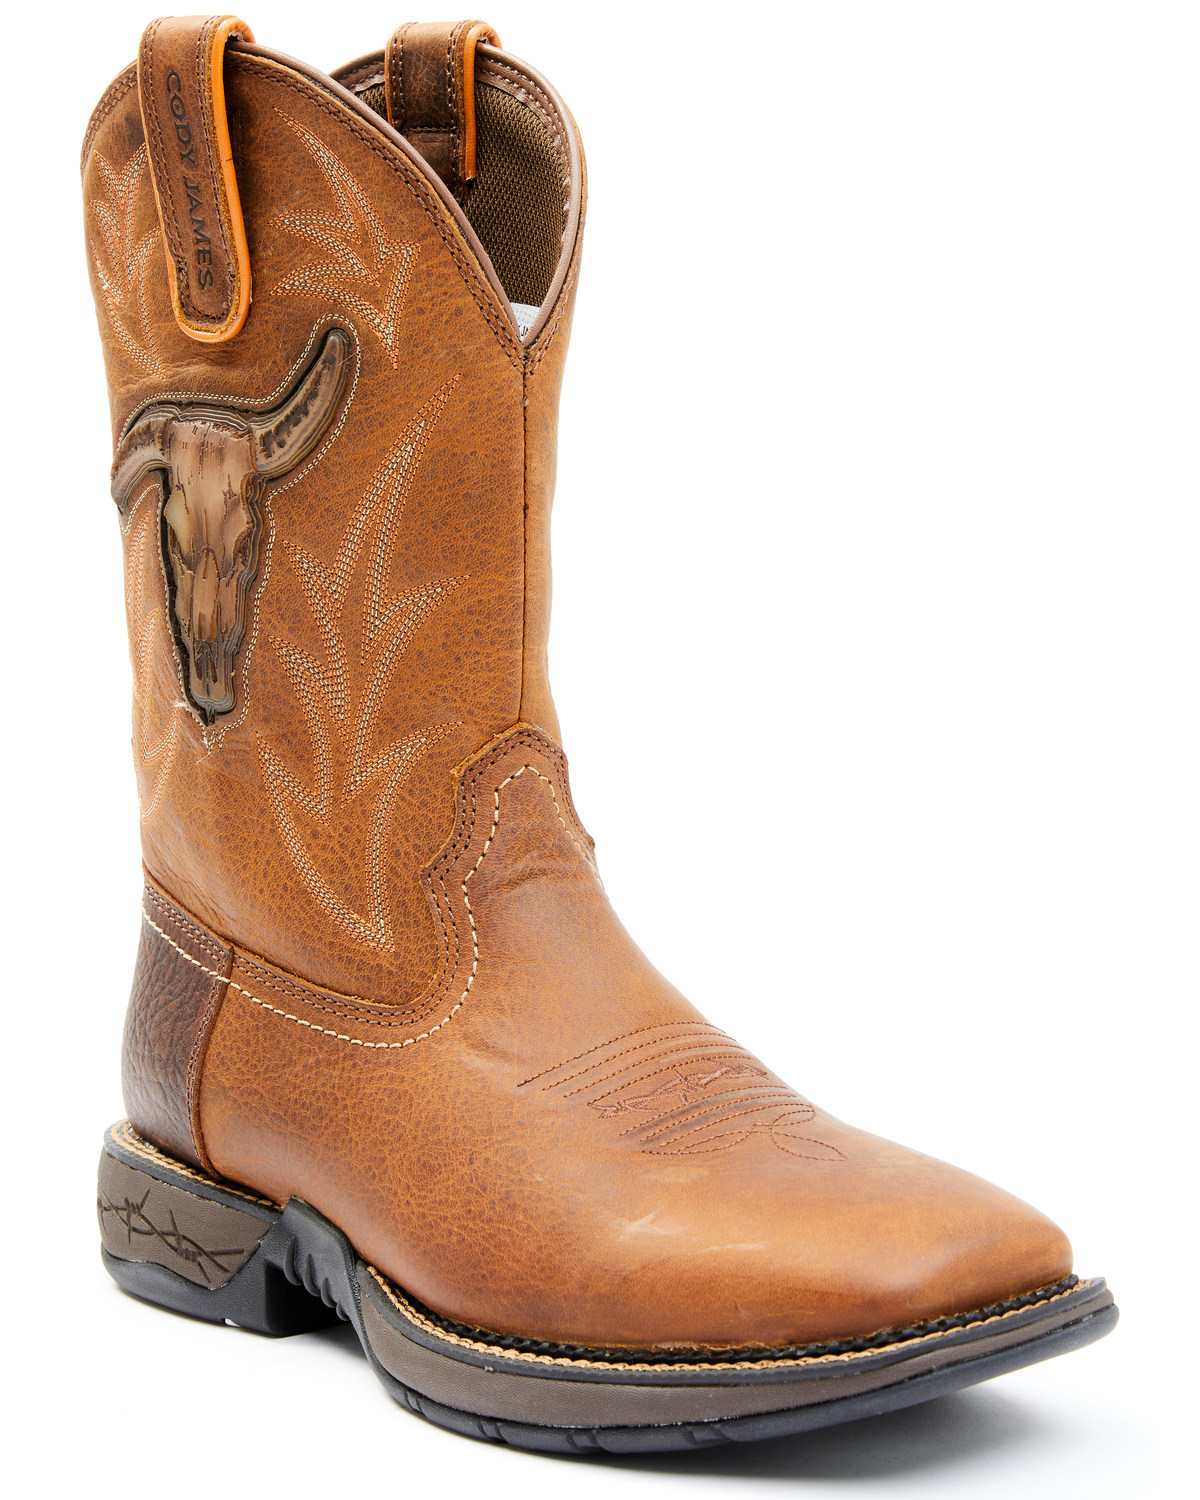 Brothers and Sons Men's Skull Western Performance Boots - Broad Square Toe